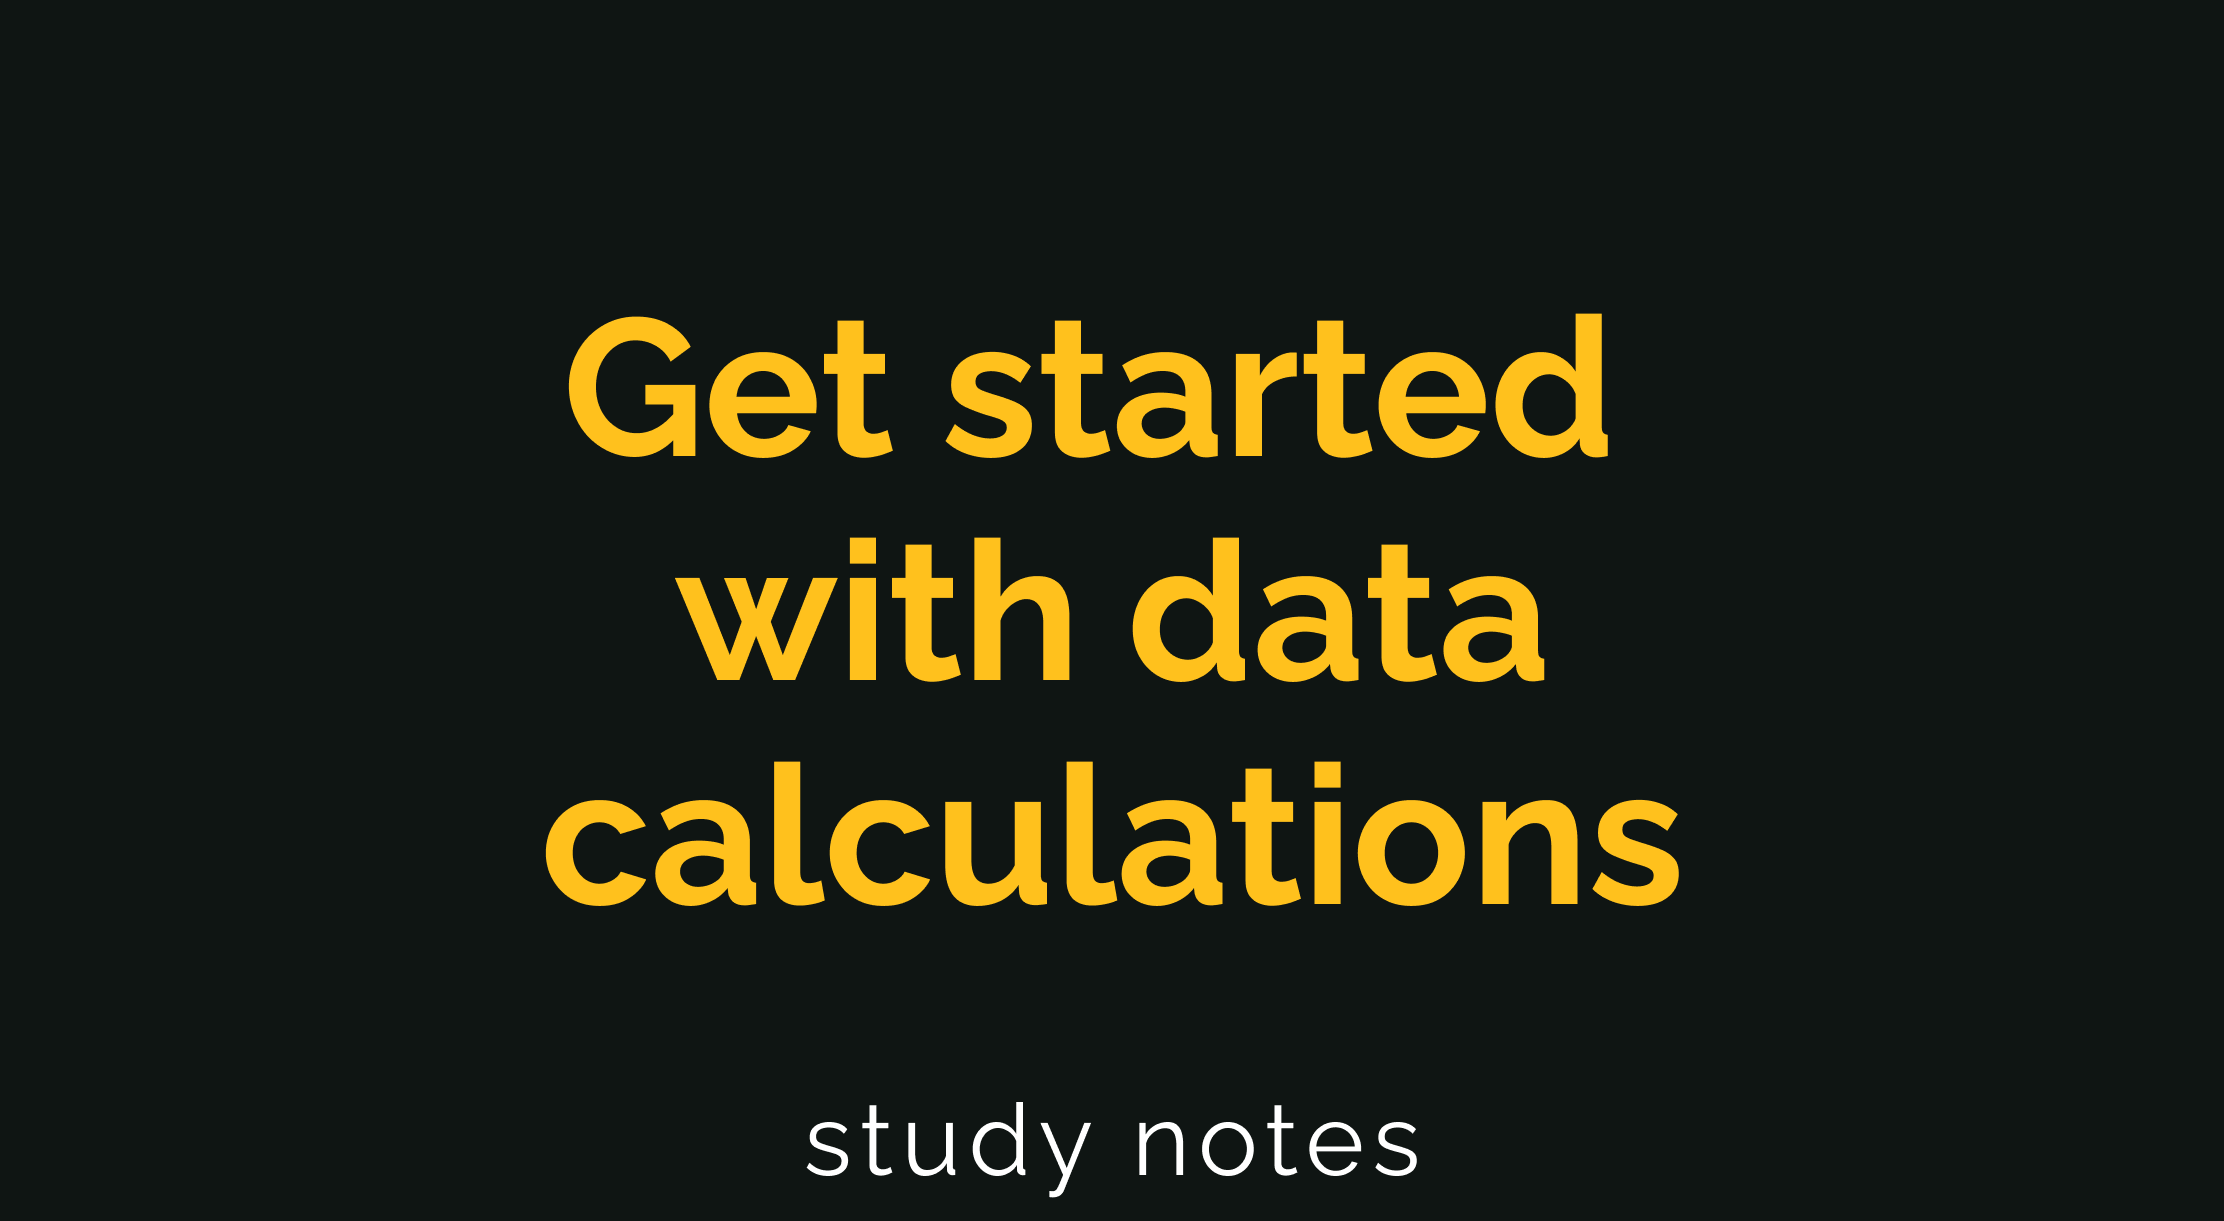 Get started with data calculations